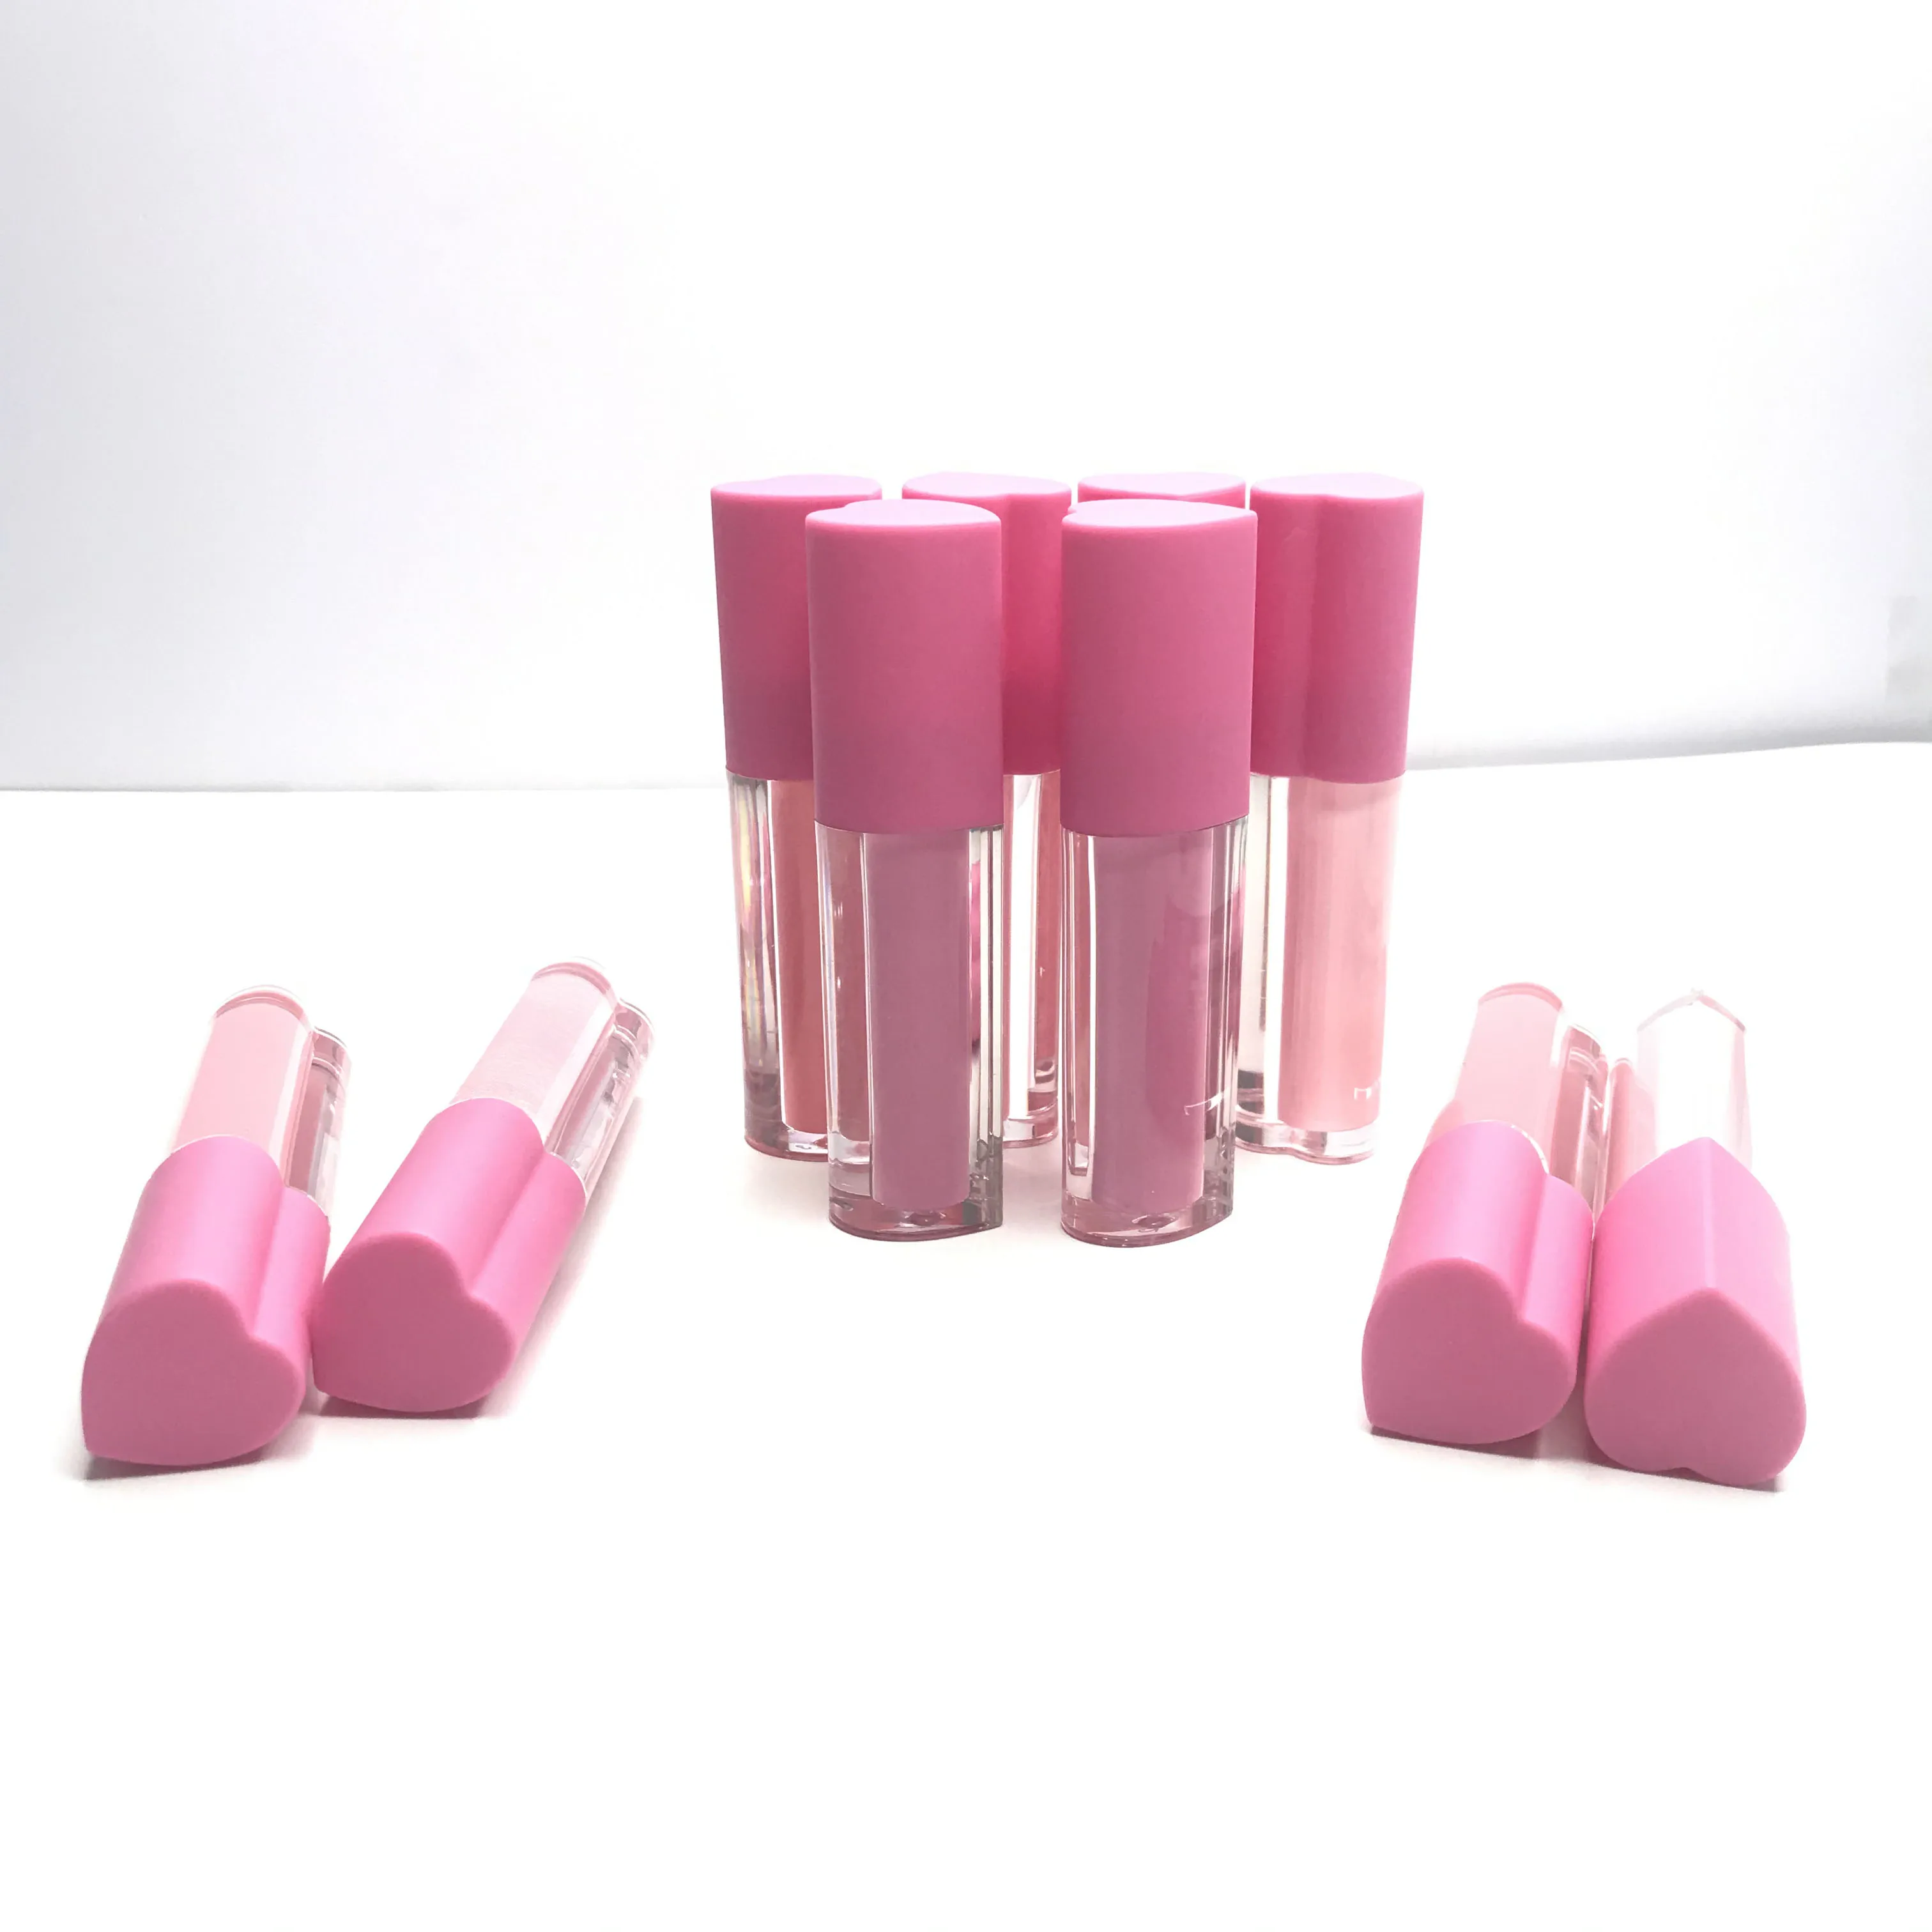 

Lipstick tube cute rose wand cheap glossy moisturizing nude shiny clear smooth lip gloss private labels